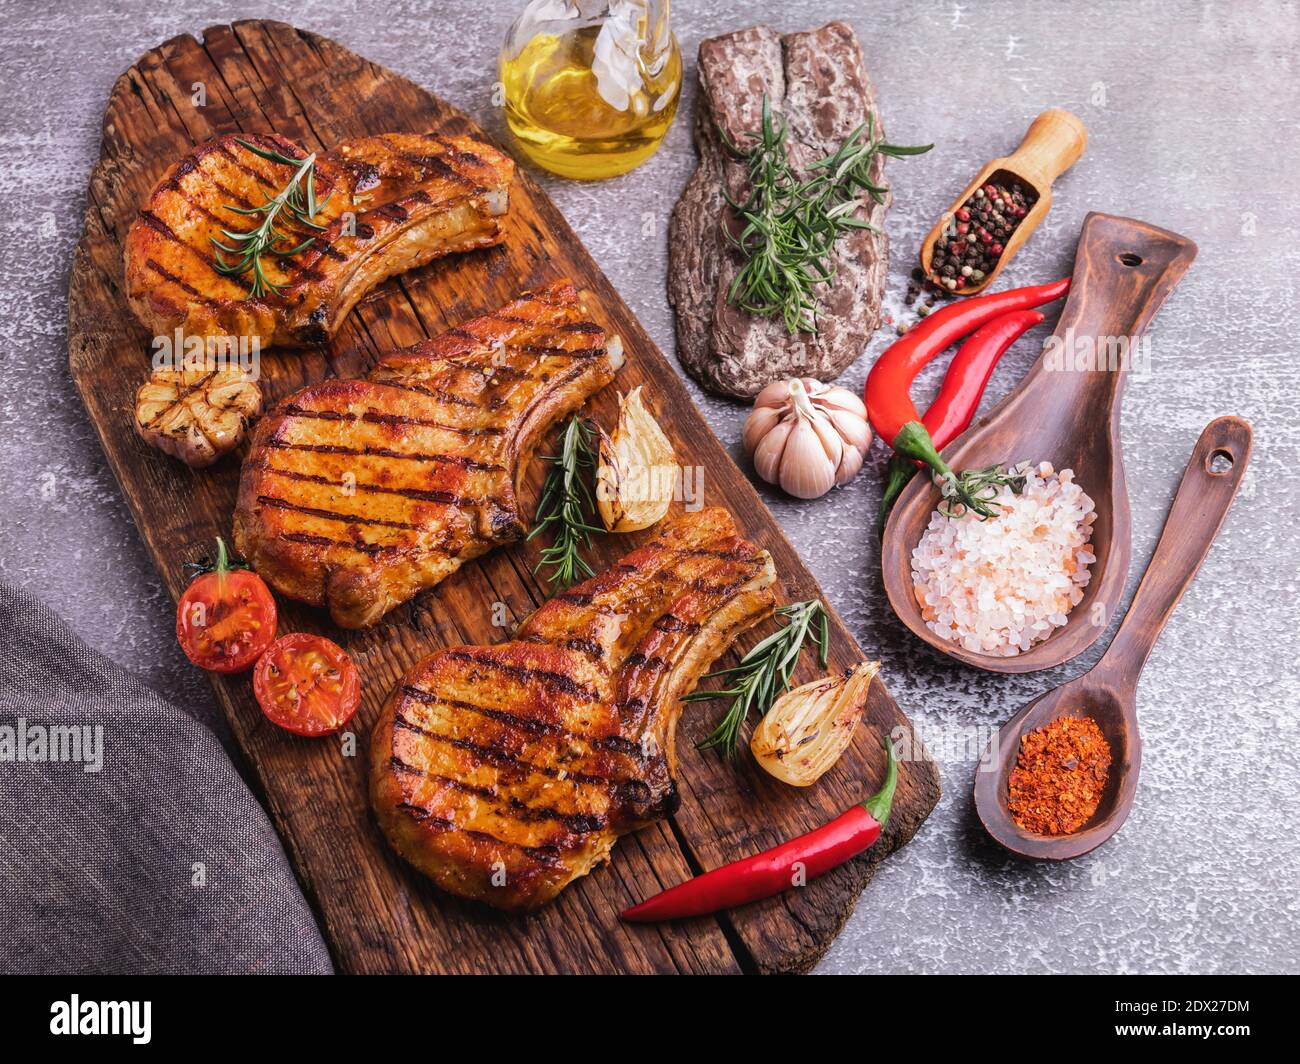 cooked grilled meat pork, beef, chop bone, cutting board, spices, tomato, rosemary Stock Photo